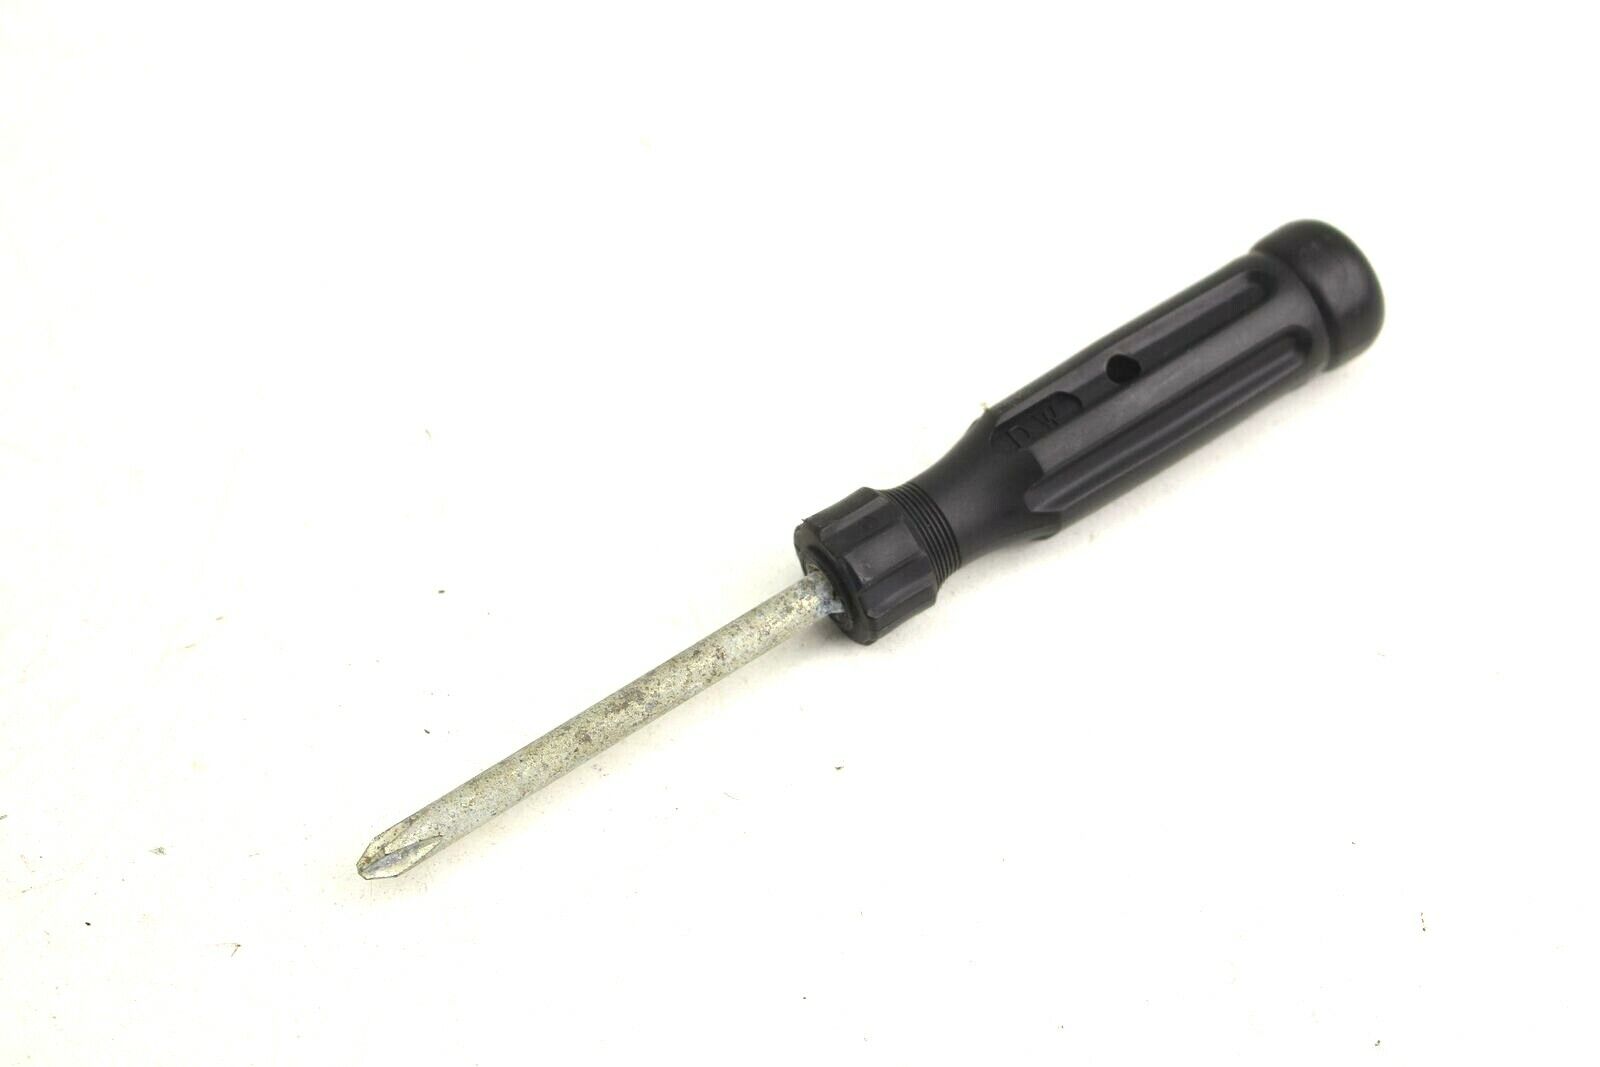 1997-2002 Daewoo Leganza Emergency Spare Tire Phillips Screw Driver Tool